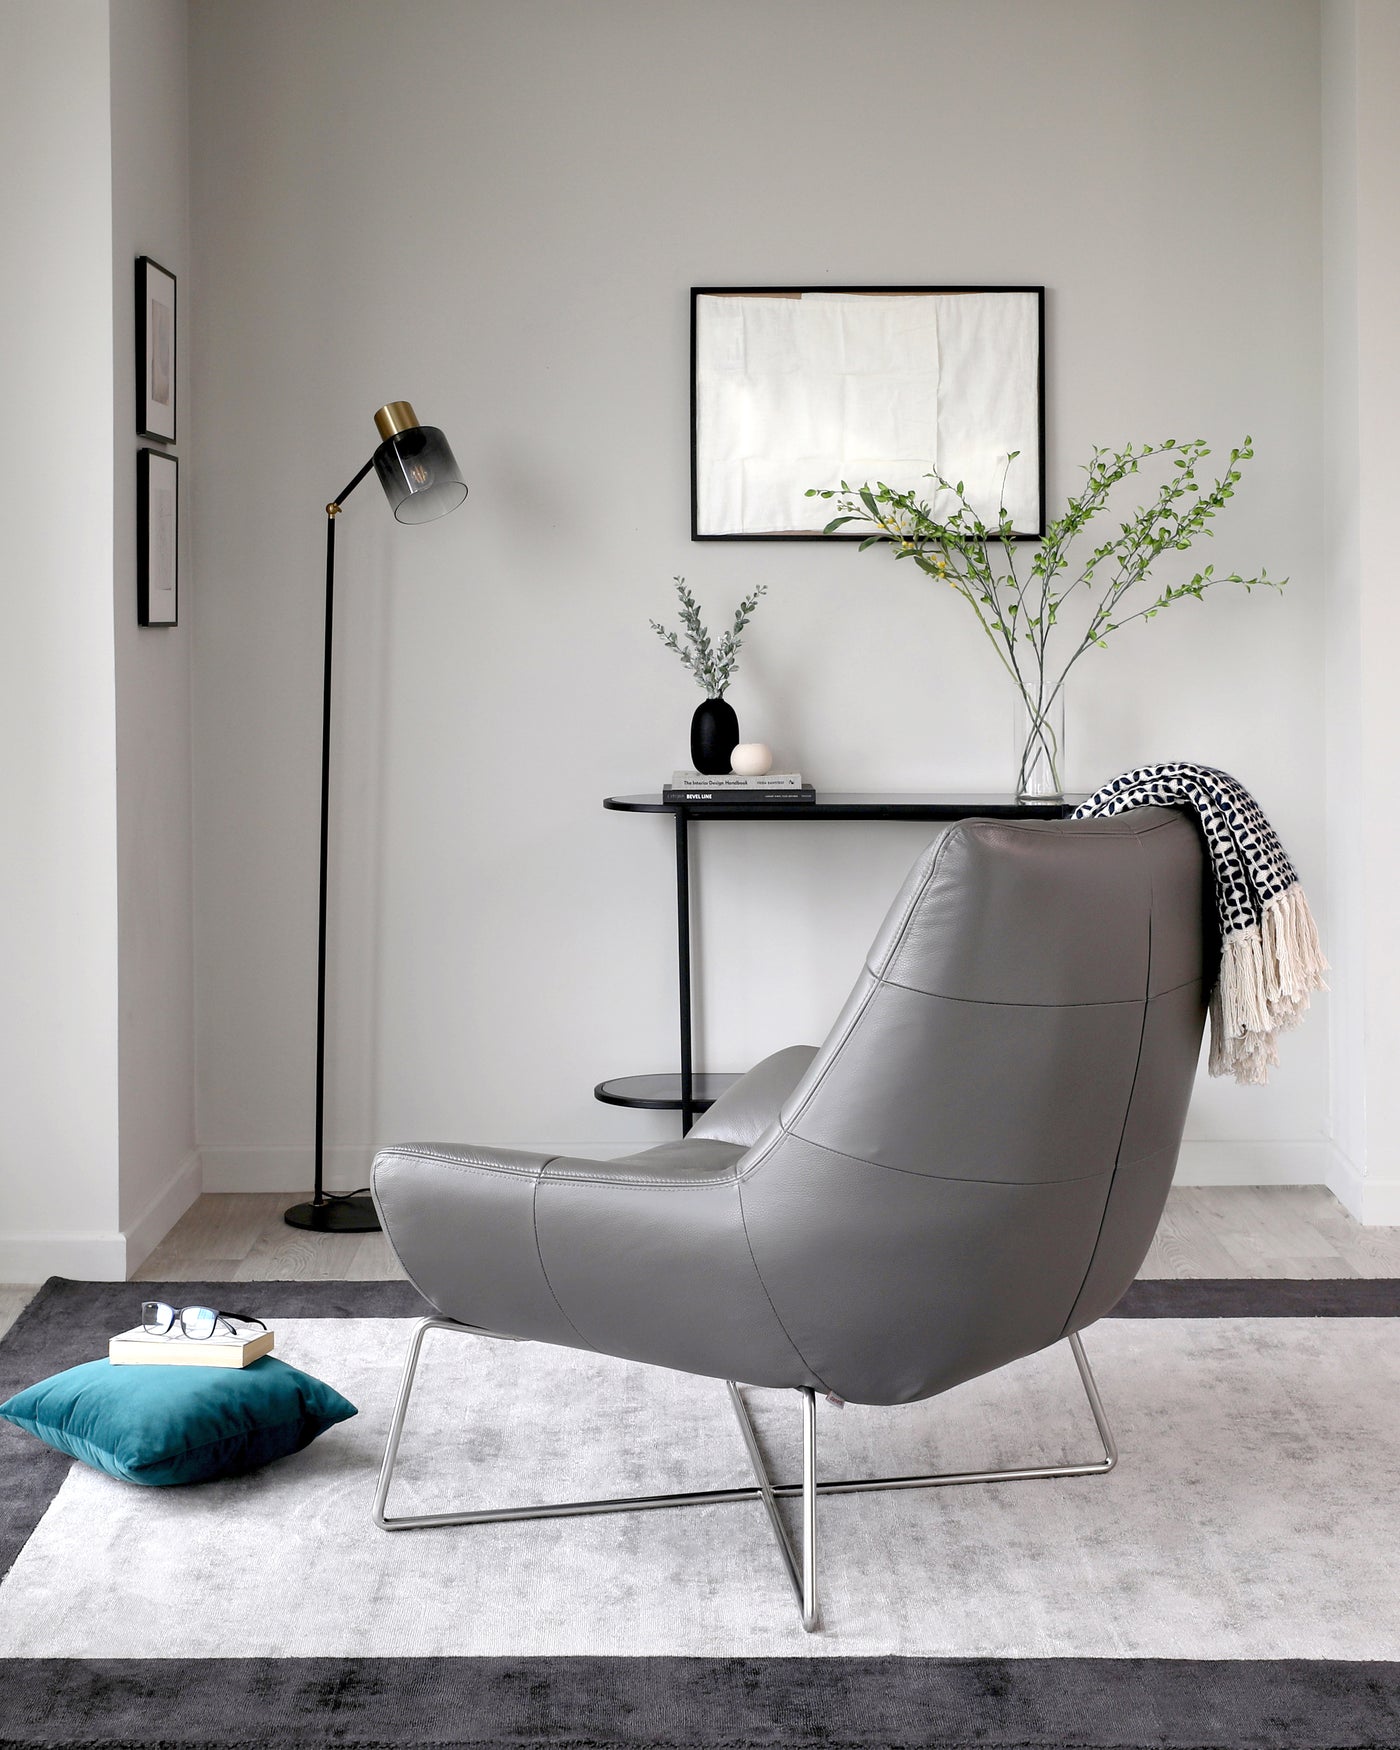 A modern grey upholstered lounge chair with a unique curved design and sleek metal legs sits on a two-tone grey area rug. Behind it, a round black side table holds a vase and book, accented by a tall floor lamp with a glass shade to the left. A framed abstract artwork hangs on the wall above the table, adding a touch of sophistication to the minimalist decor.